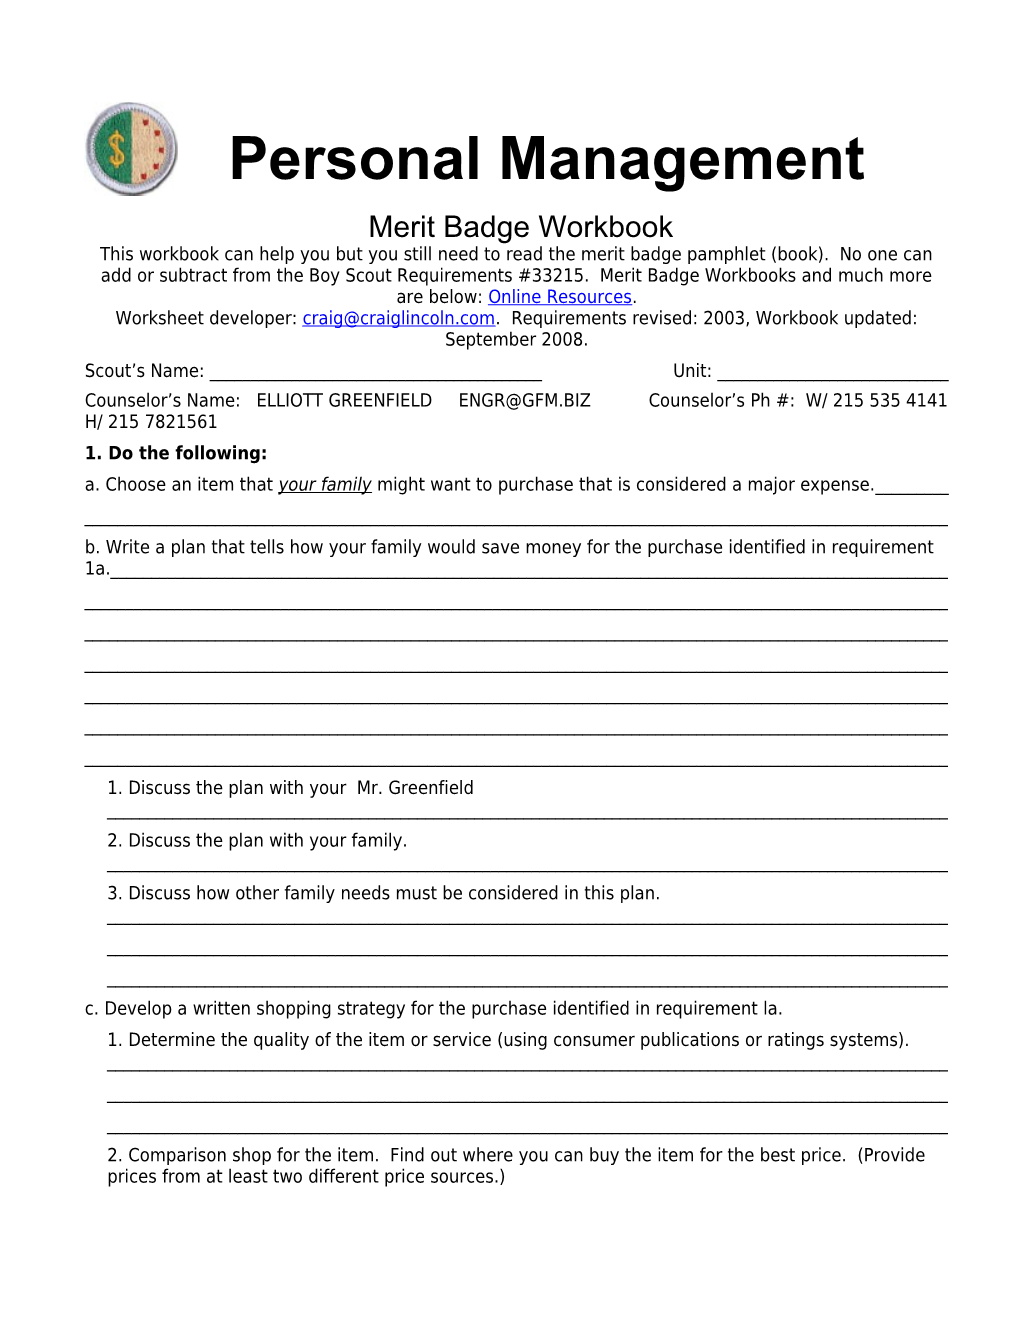 Personal Management P. 1 Merit Badge Workbookscout S Name: ______